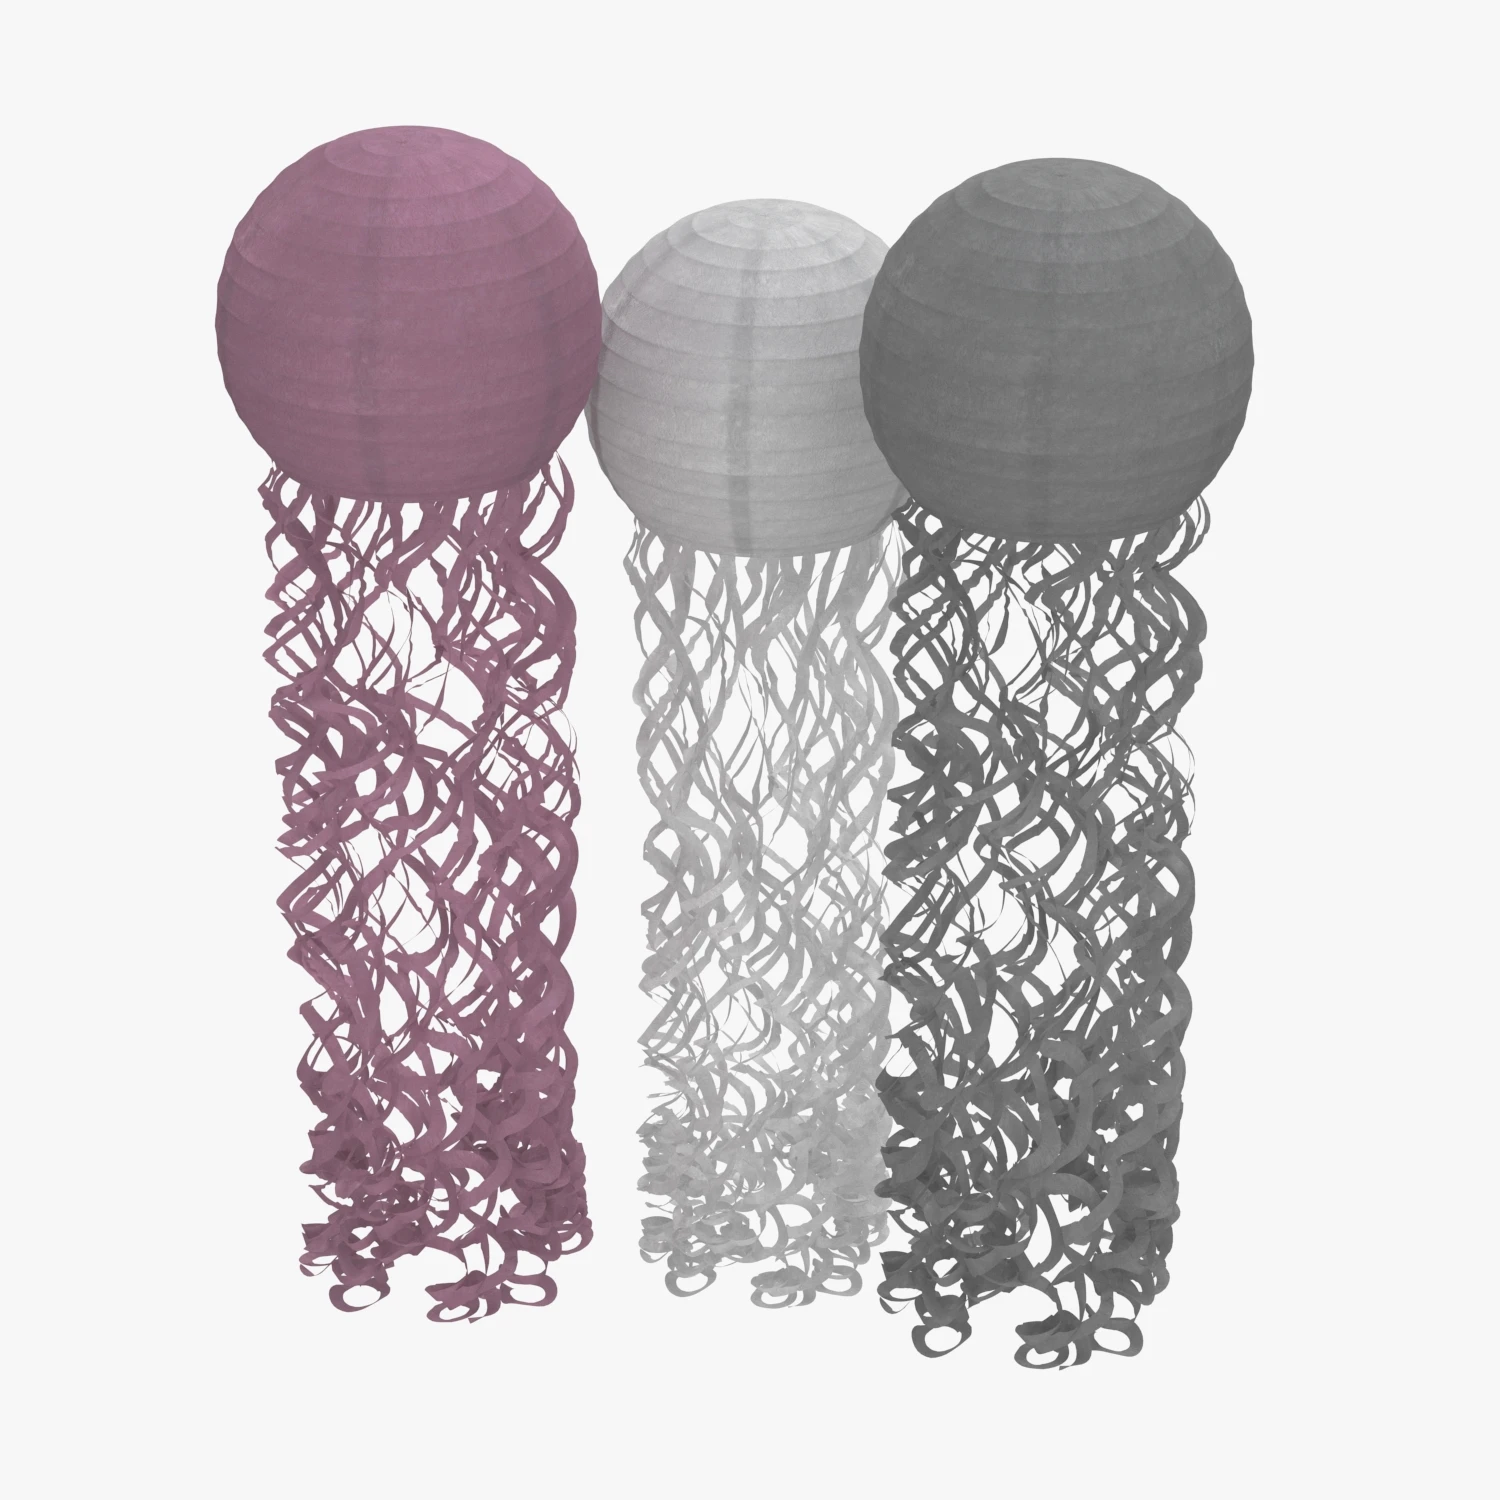 Jellyfish Paper Lanterns 3 Pack Pink White and Gray 3D Model_06